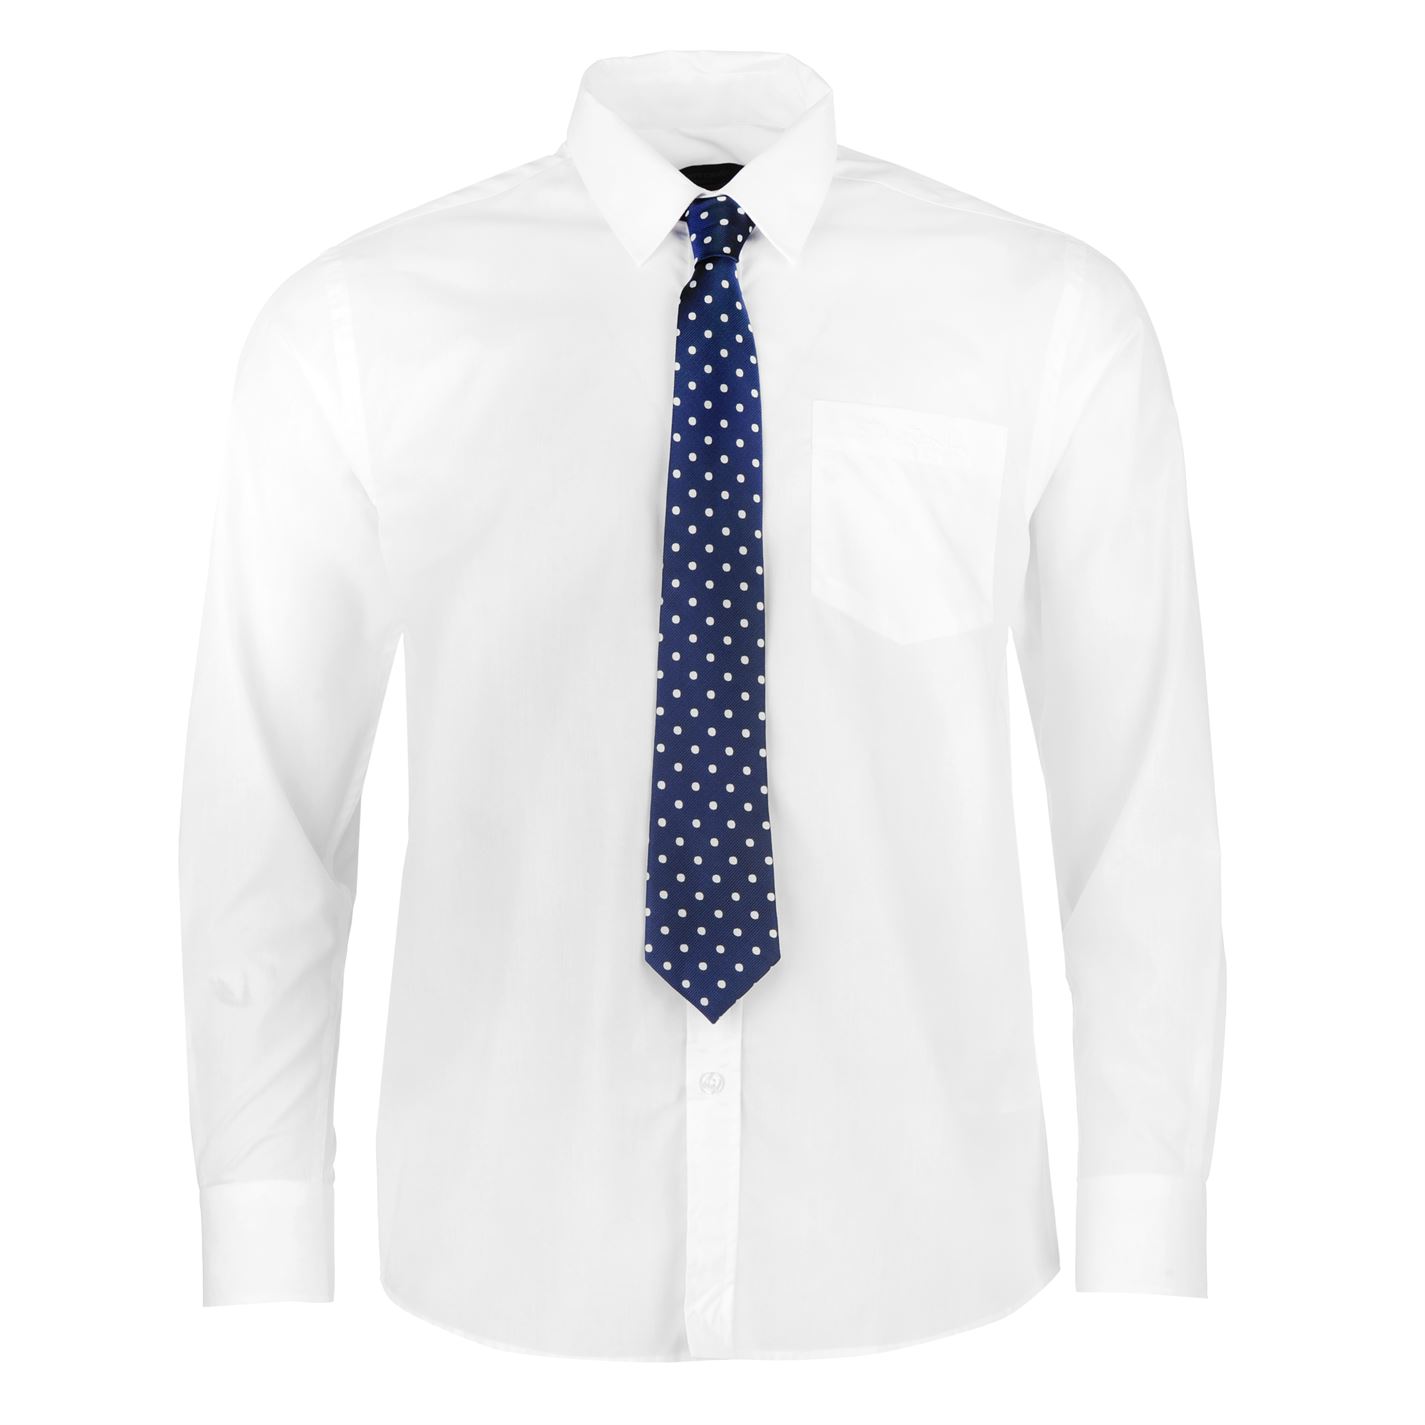 Pierre Cardin Shirt and Tie Set Mens